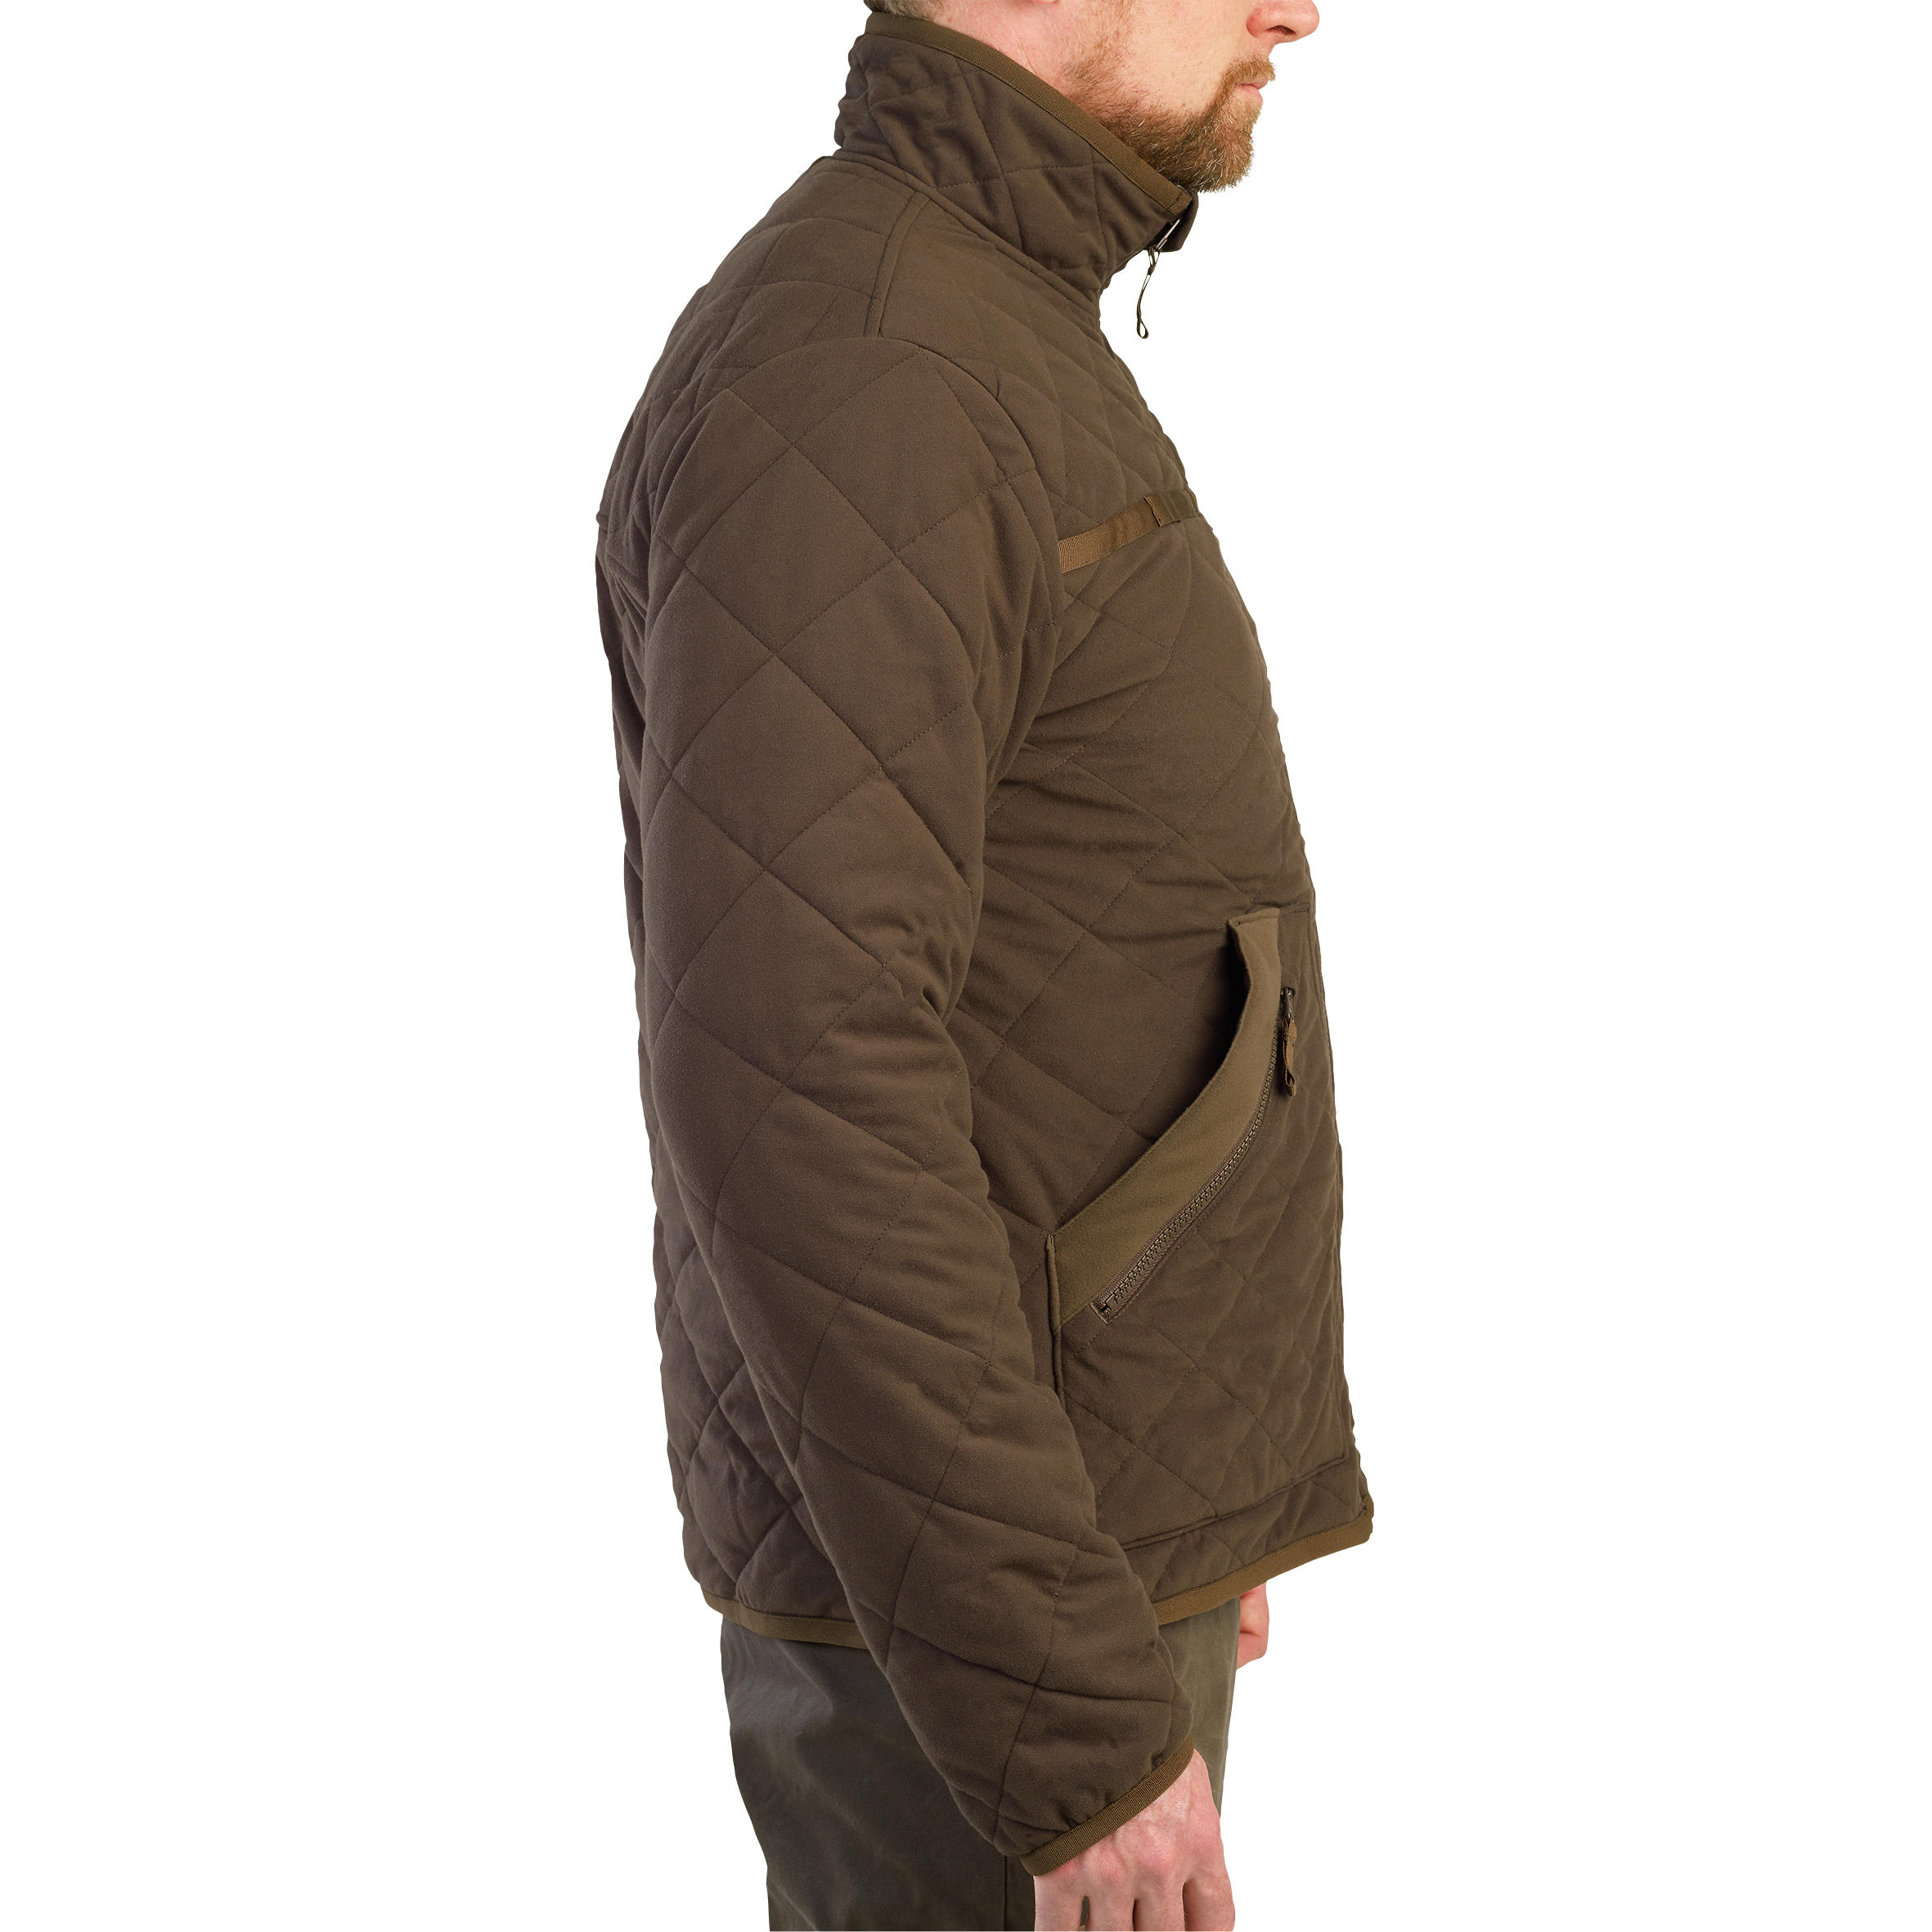 Silent Padded Jacket - 500 Brown - SOLOGNAC